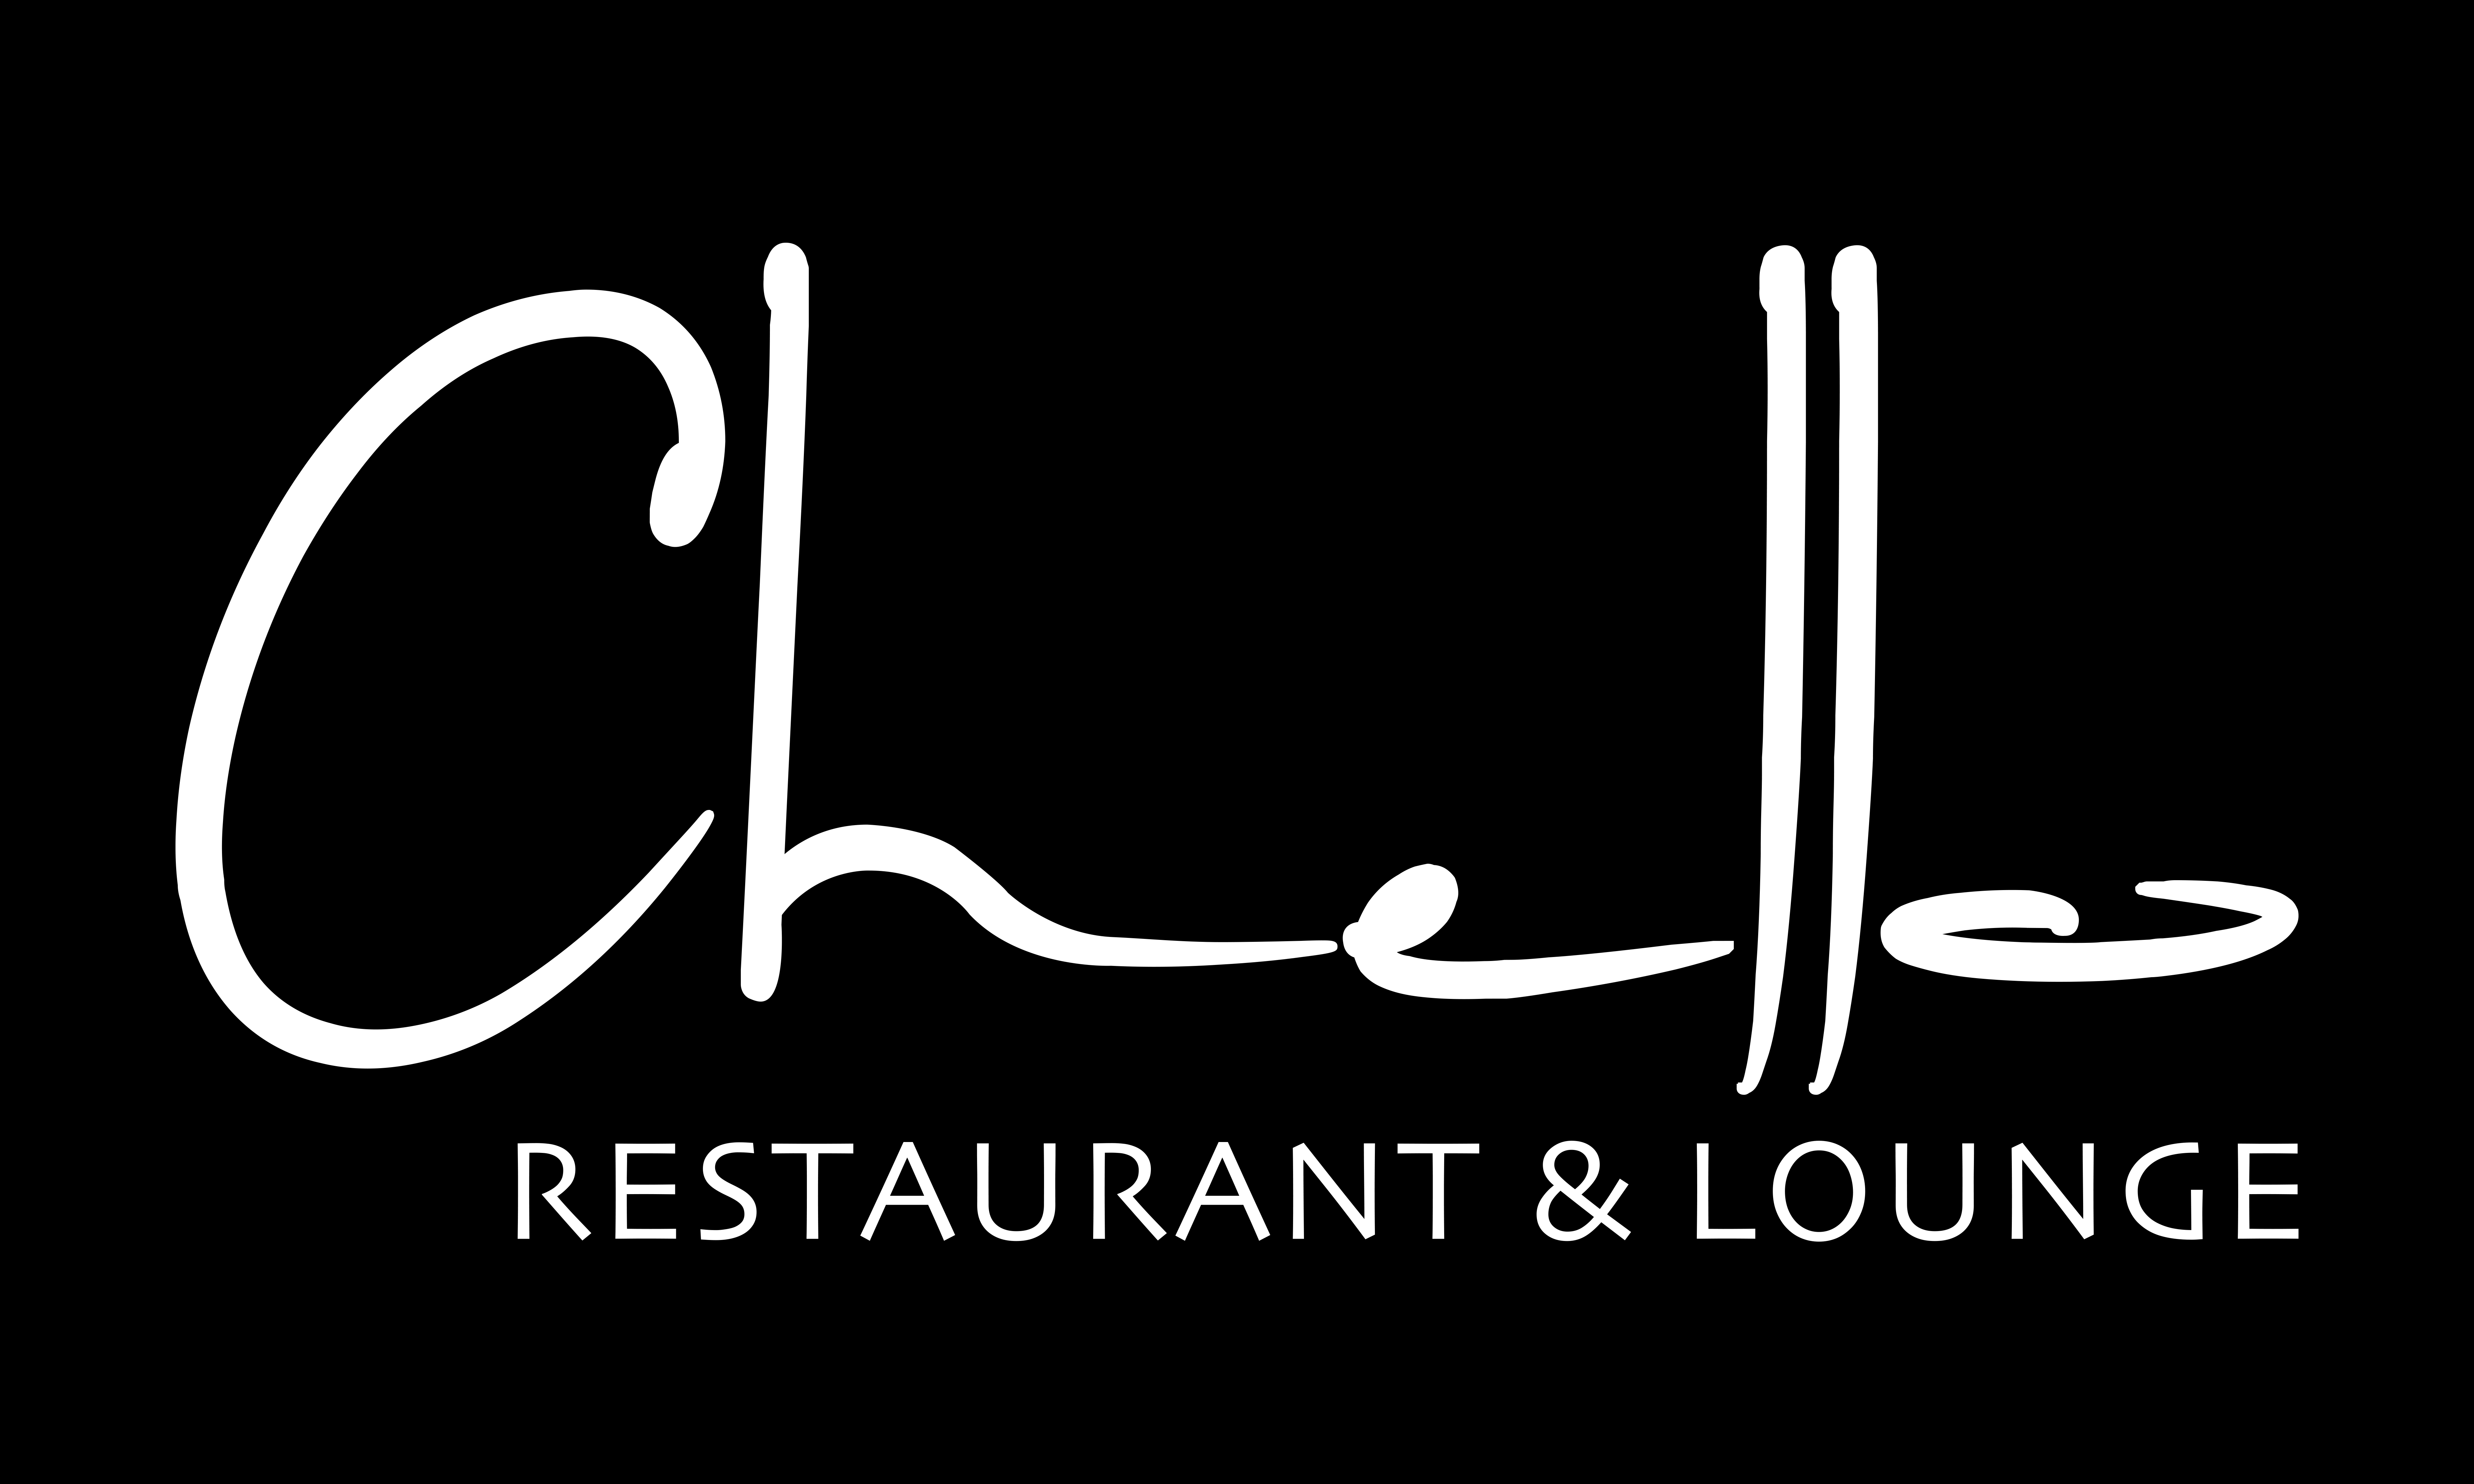 Chello Restaurant & Lounge Restaurant Info and Reservations